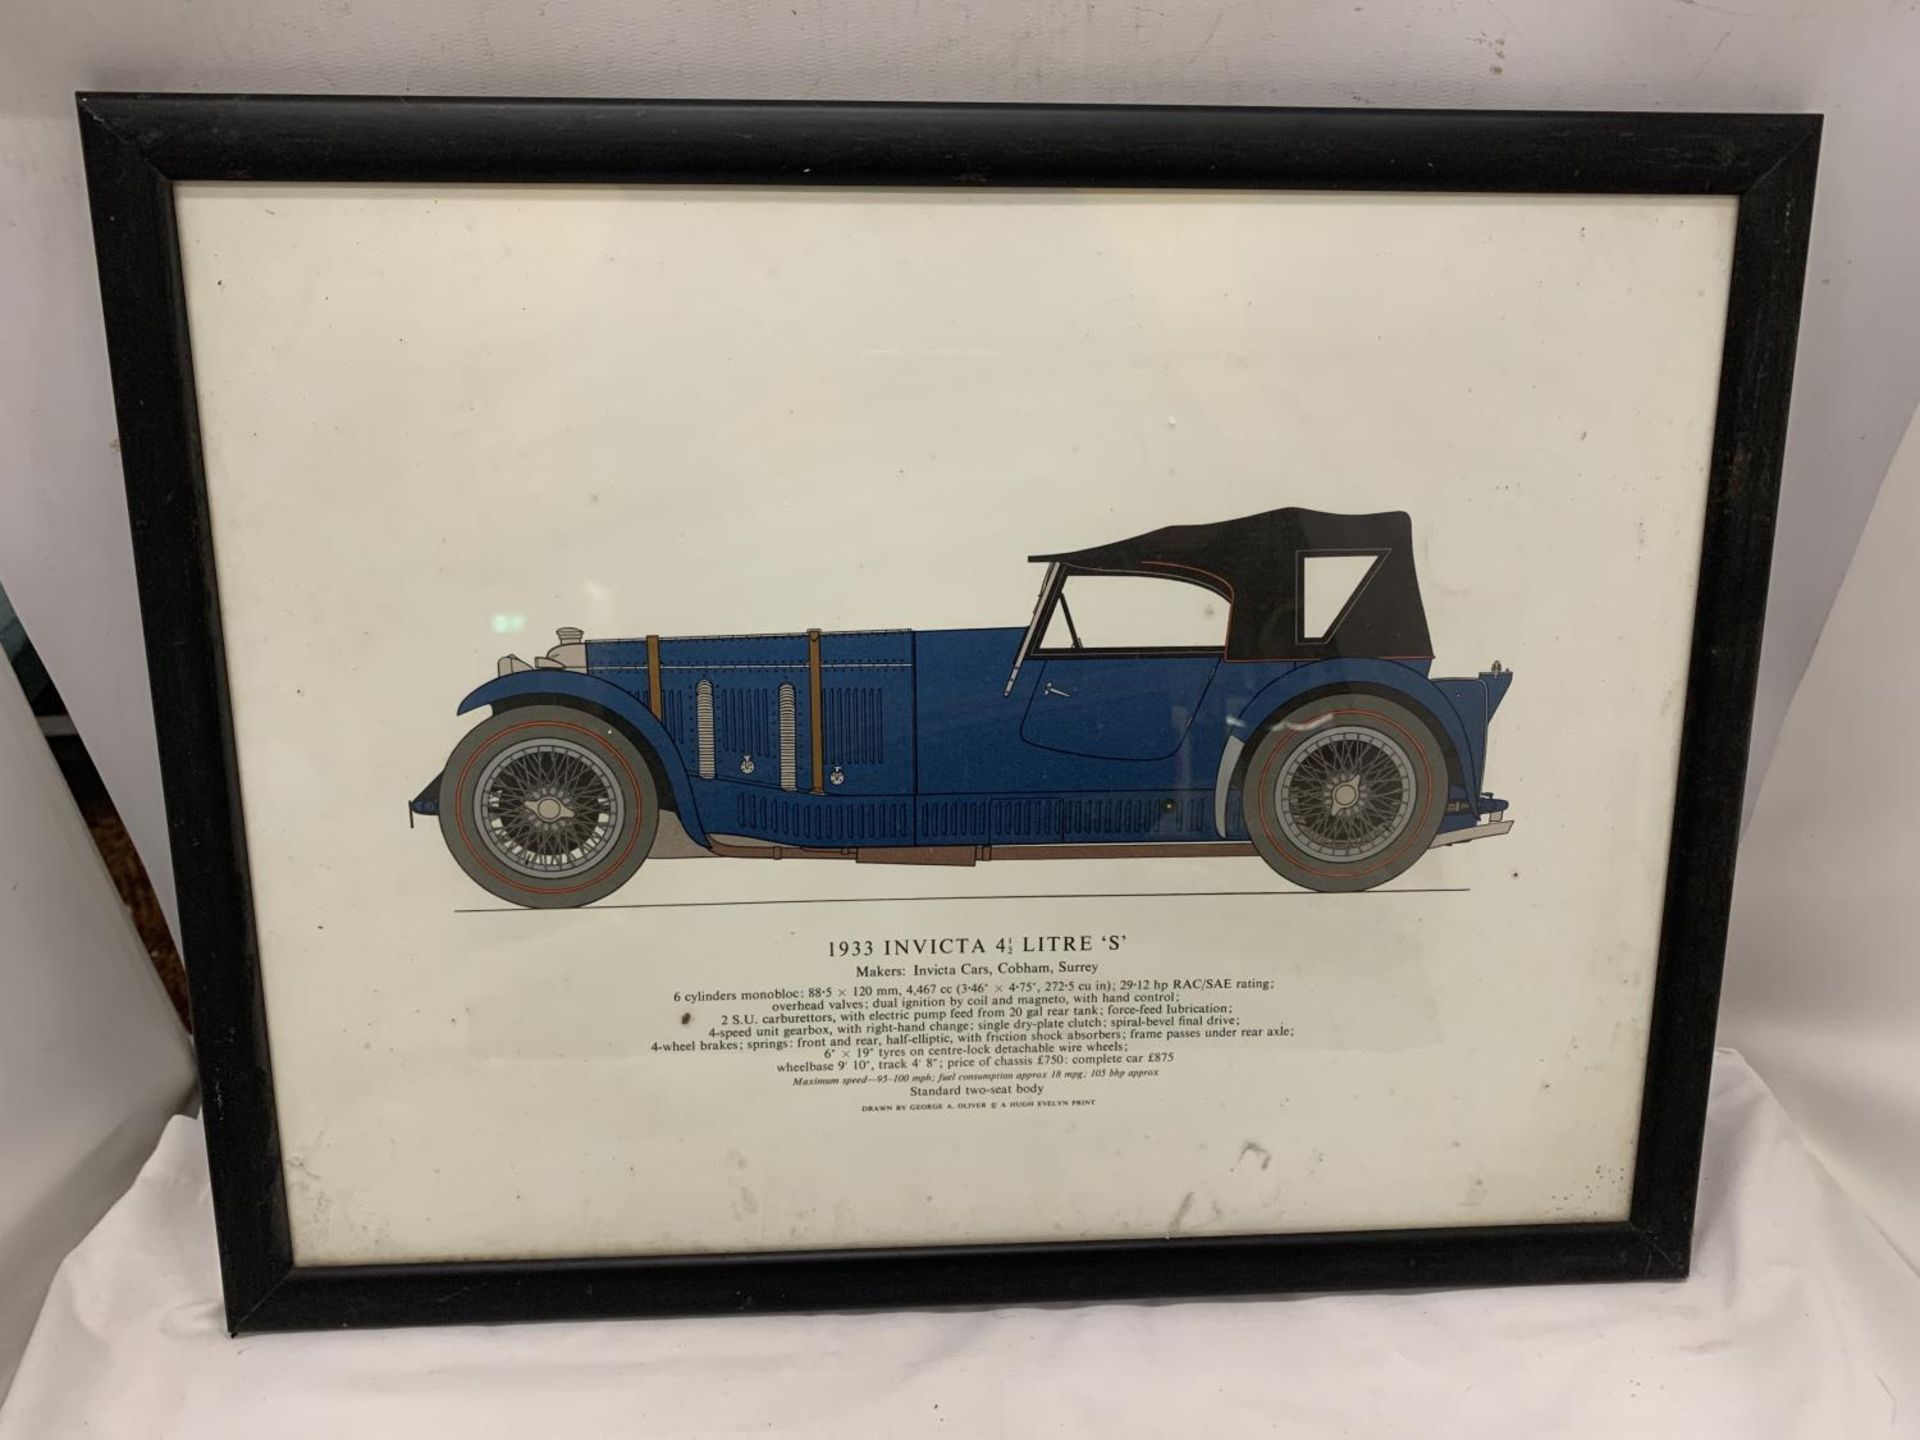 SIX FRAMED PRINTS OF VINTAGE CARS TO INCLUDE A 1930 AUSTIN 7 'ULSTER', 1926 SUNBEAM 3 LITRE, ETC - Image 6 of 7